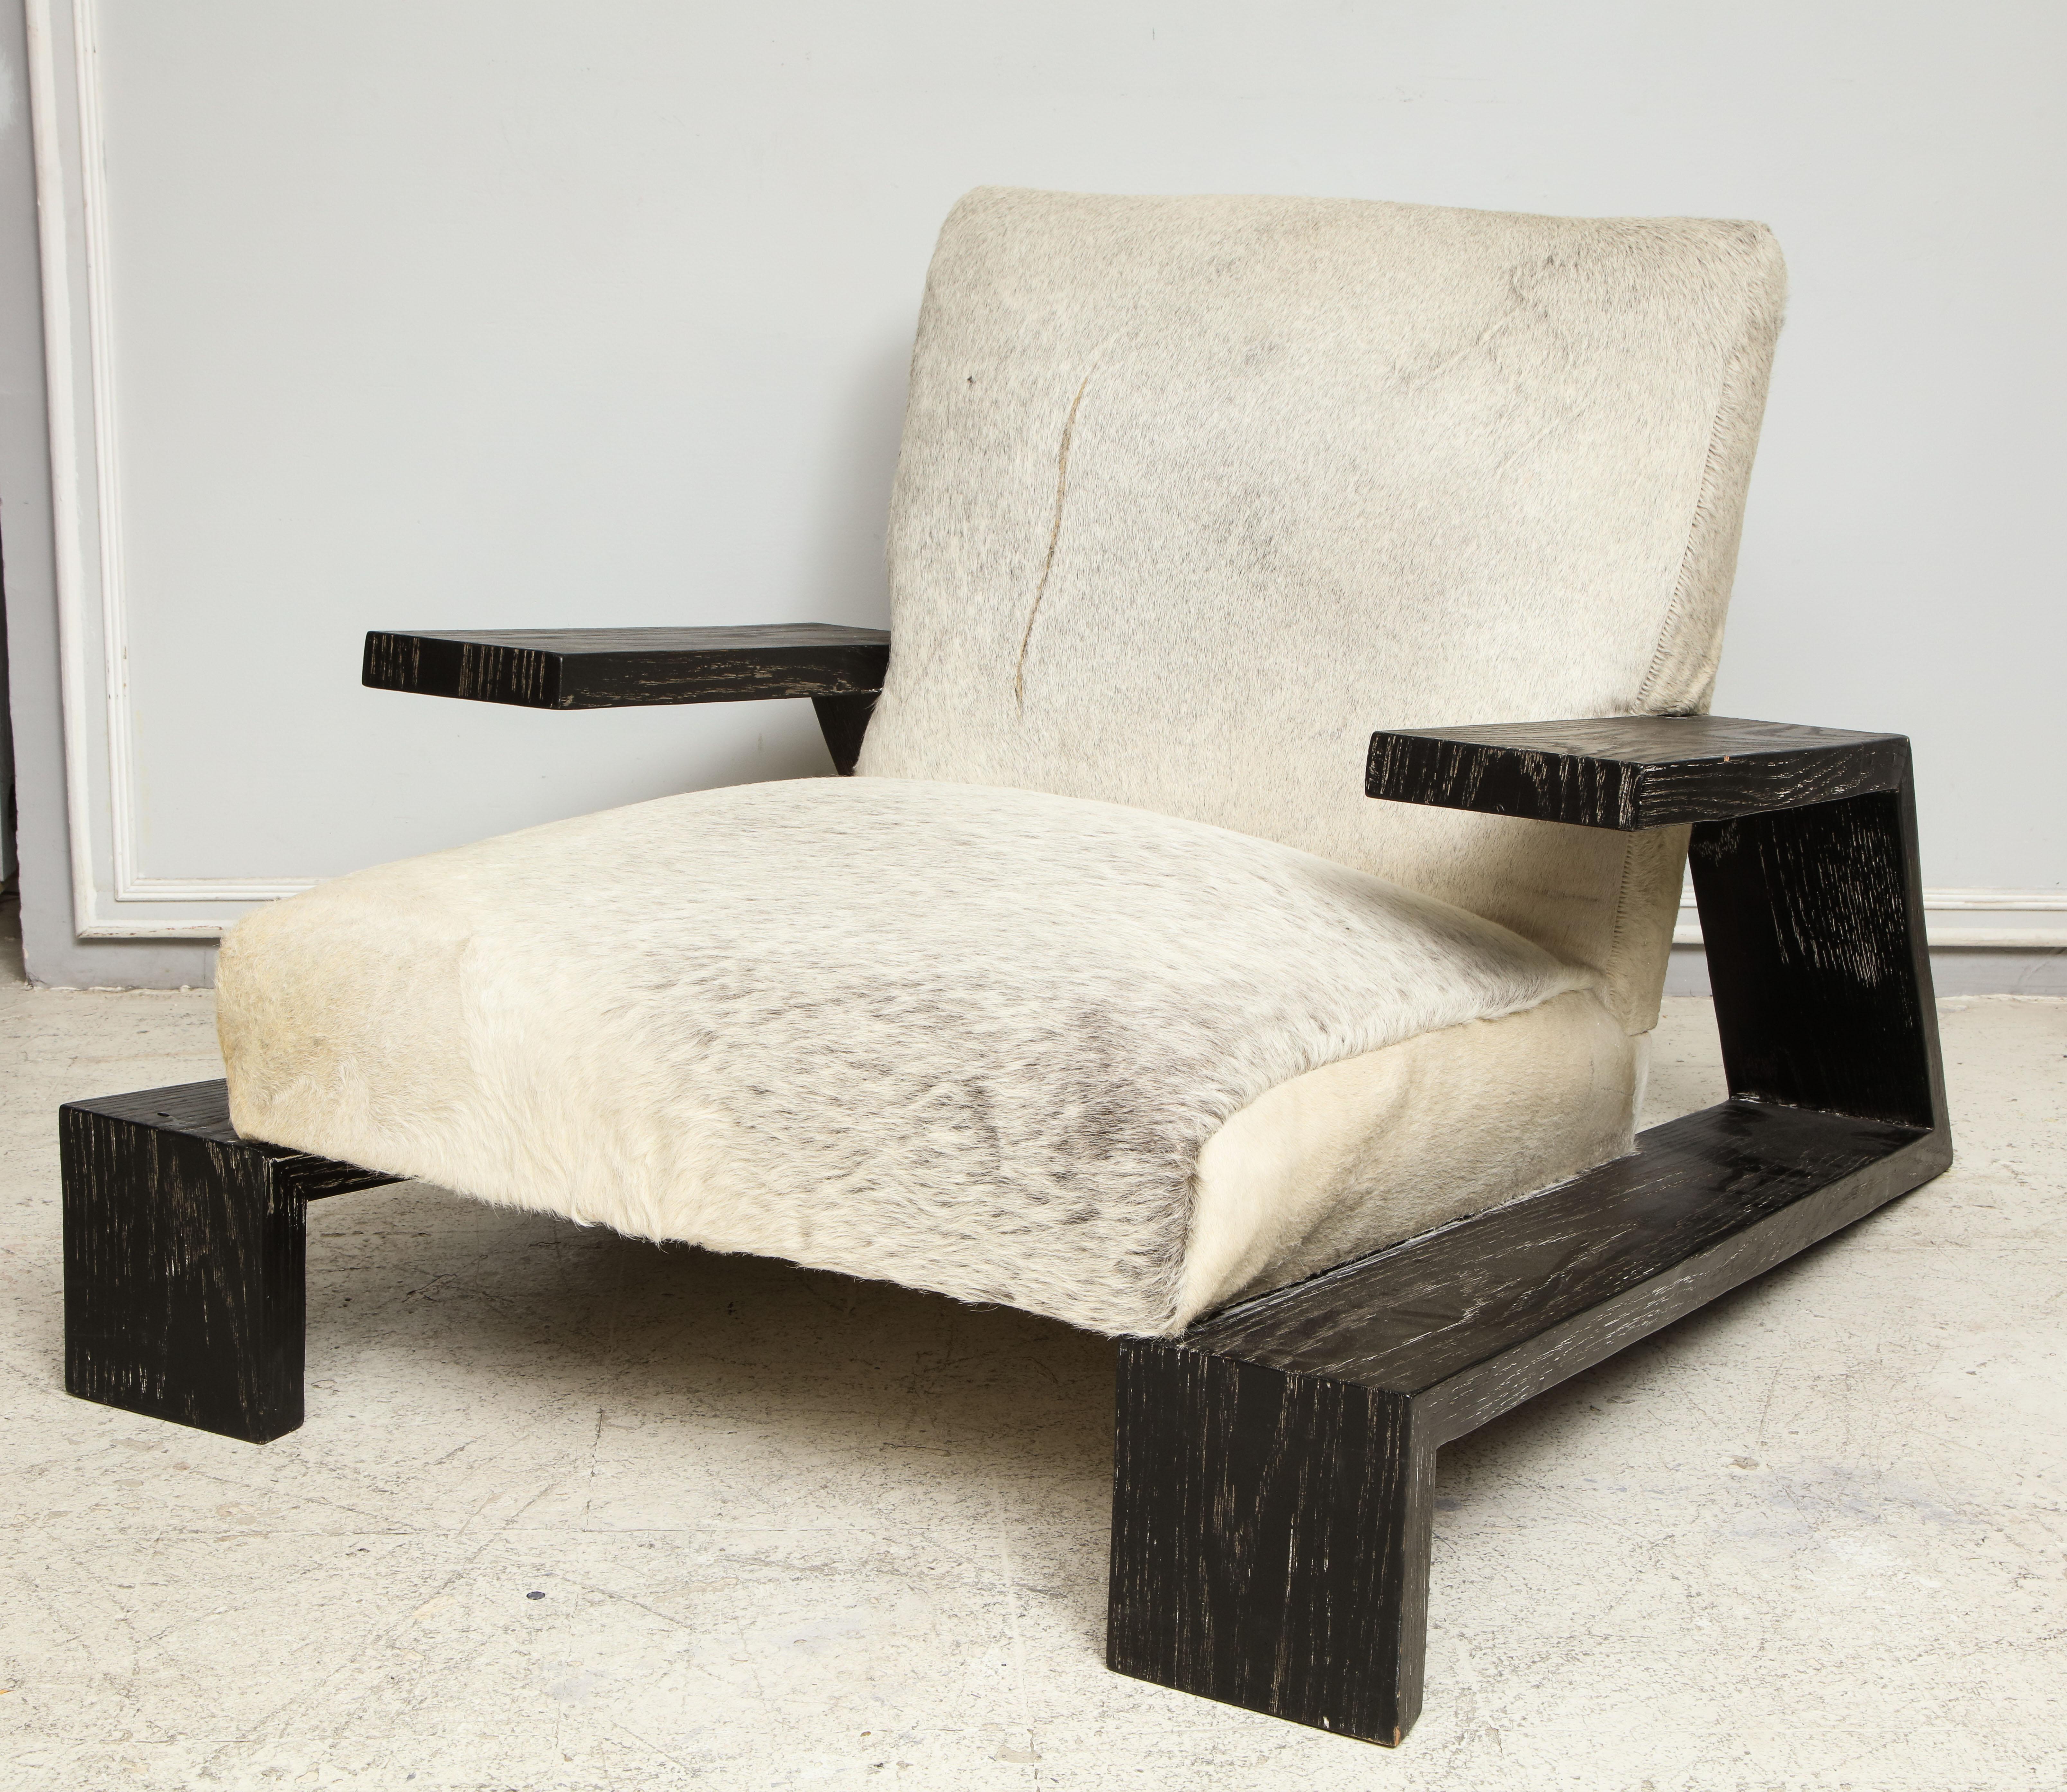 French Pair of Jean-Michel Frank Style Cerused Oak Lounge Chairs Upholstered in Cowhide